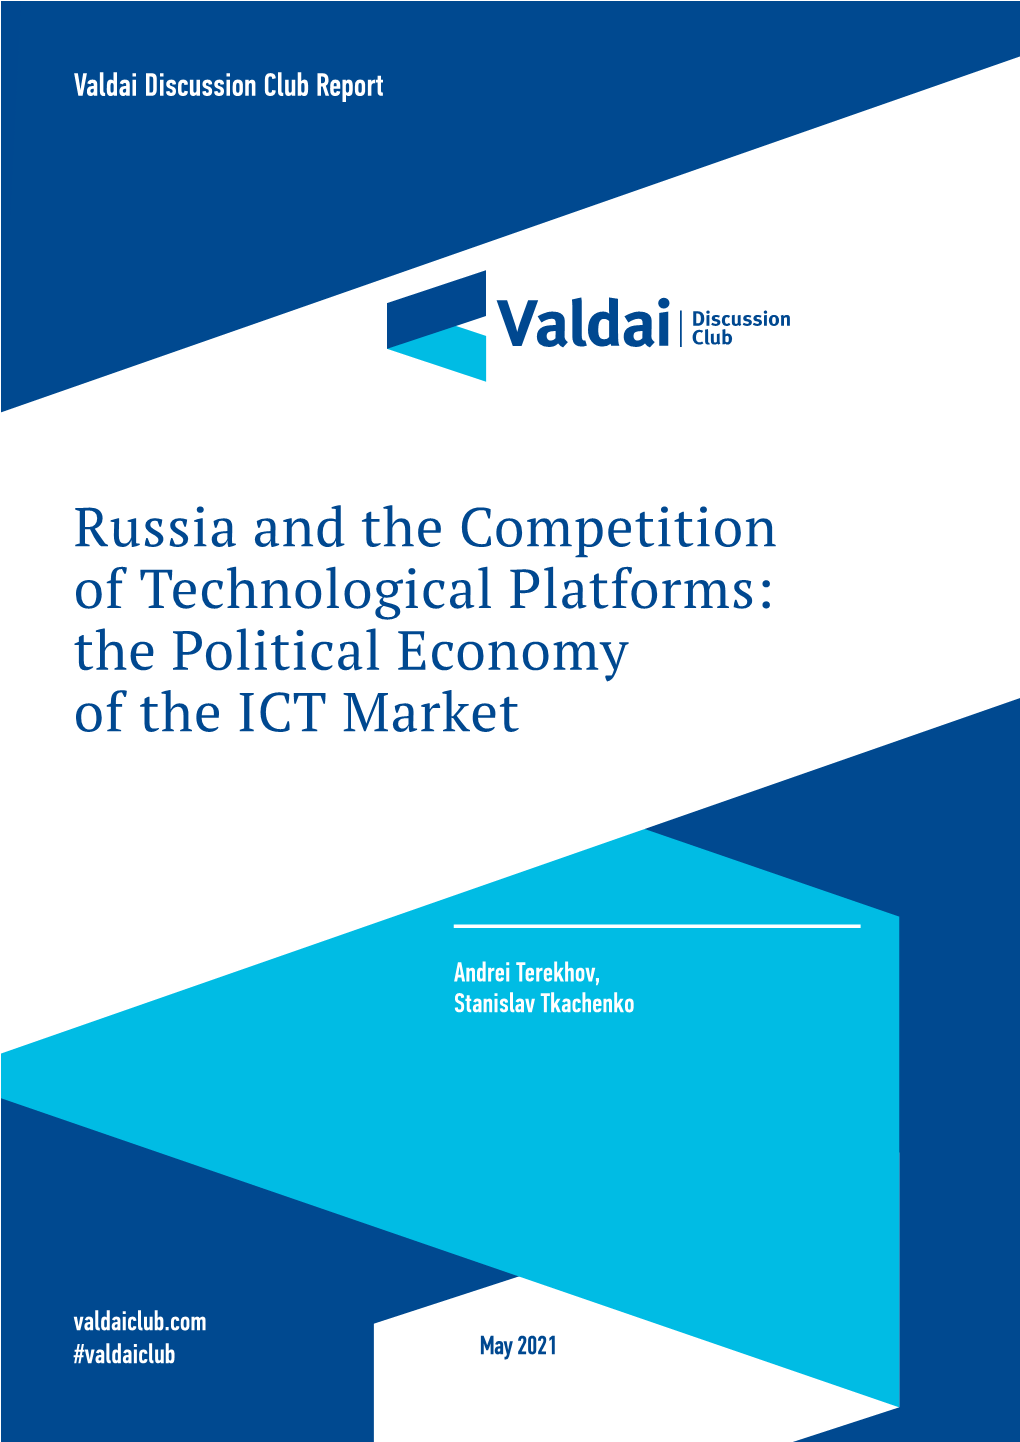 The Political Economy of the ICT Market